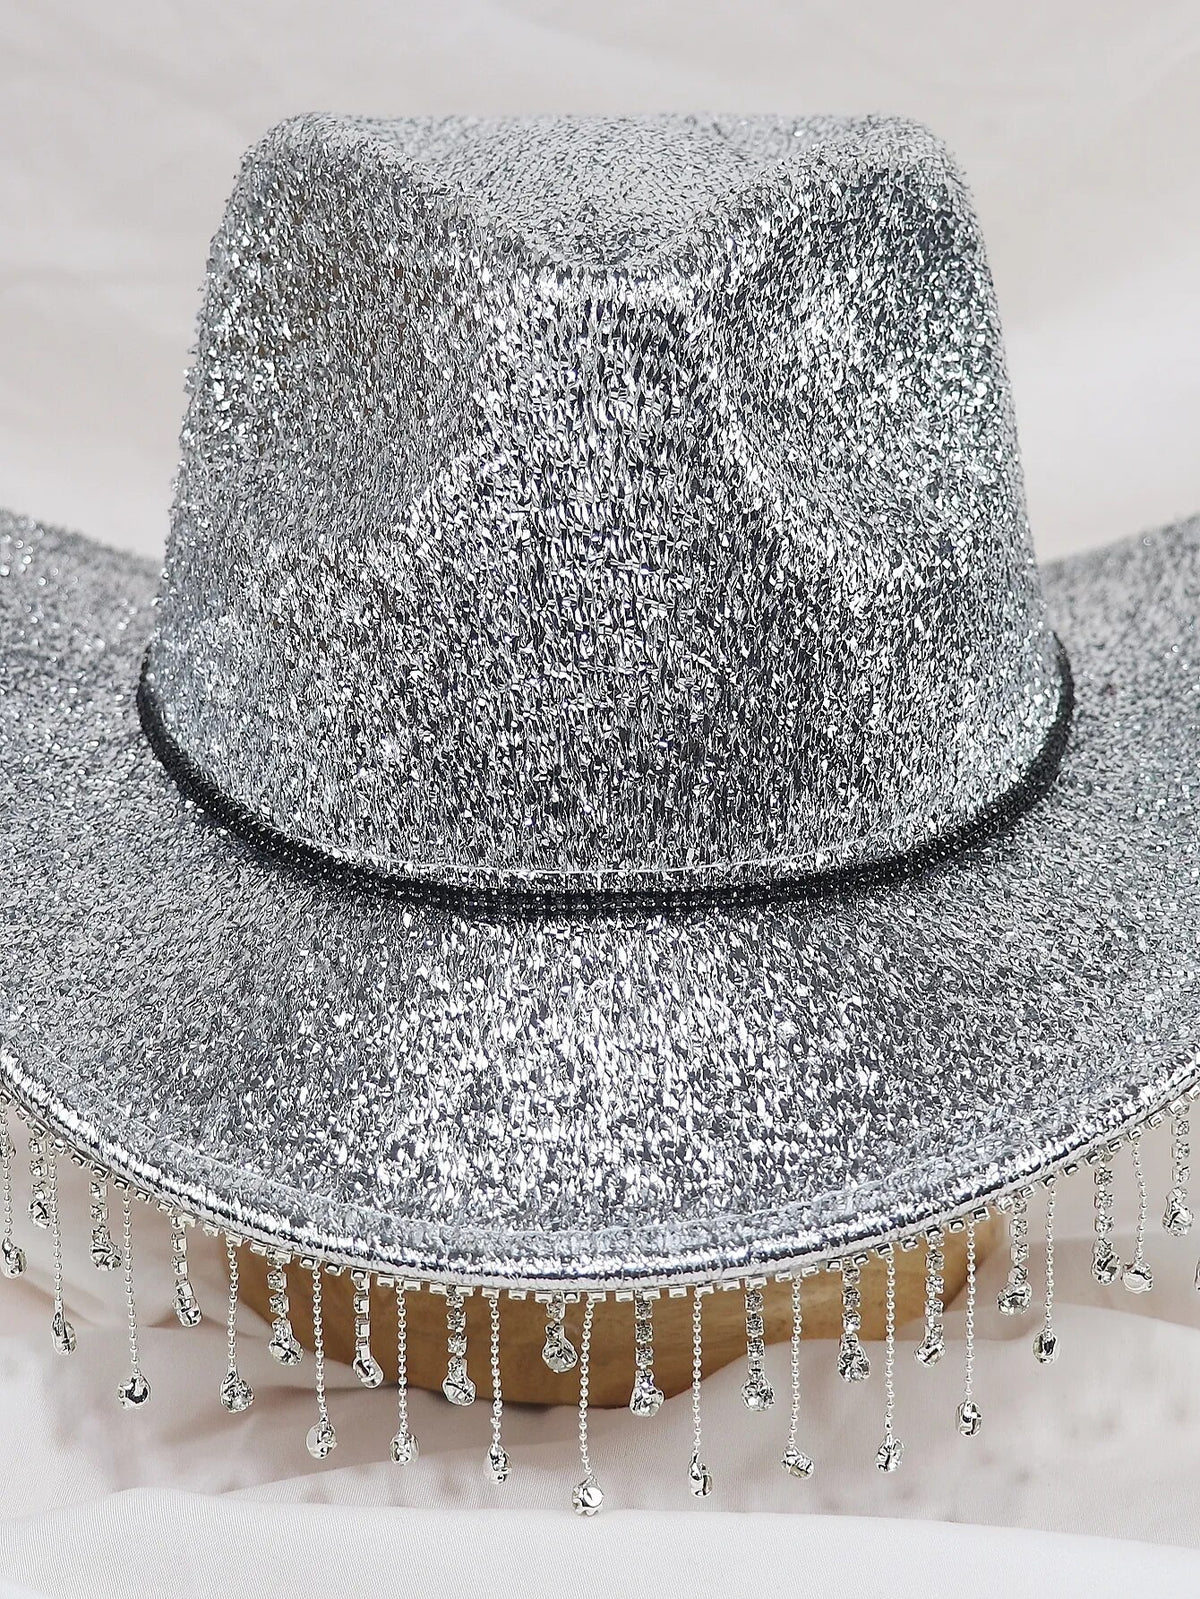 Glittering Cowboy Hat with Dangling Beads